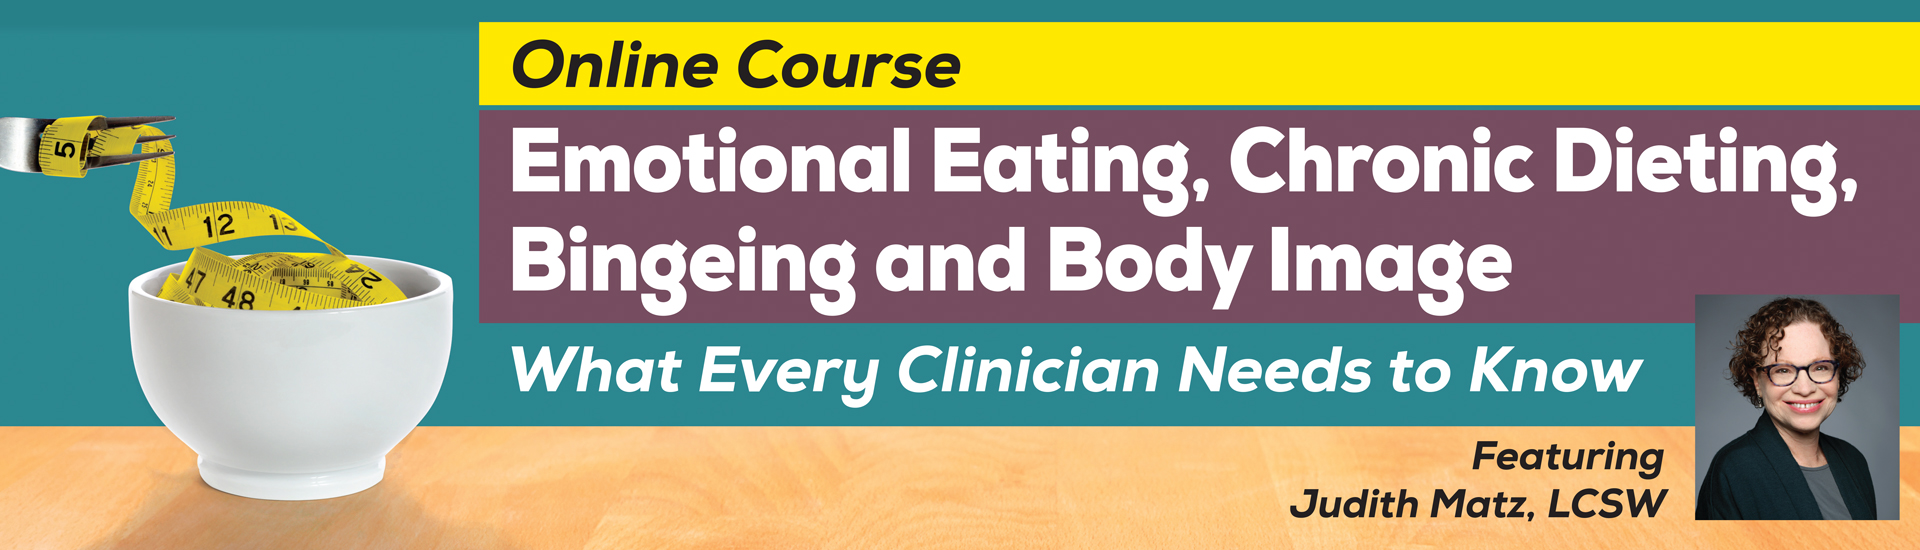 Emotional Eating Online Course